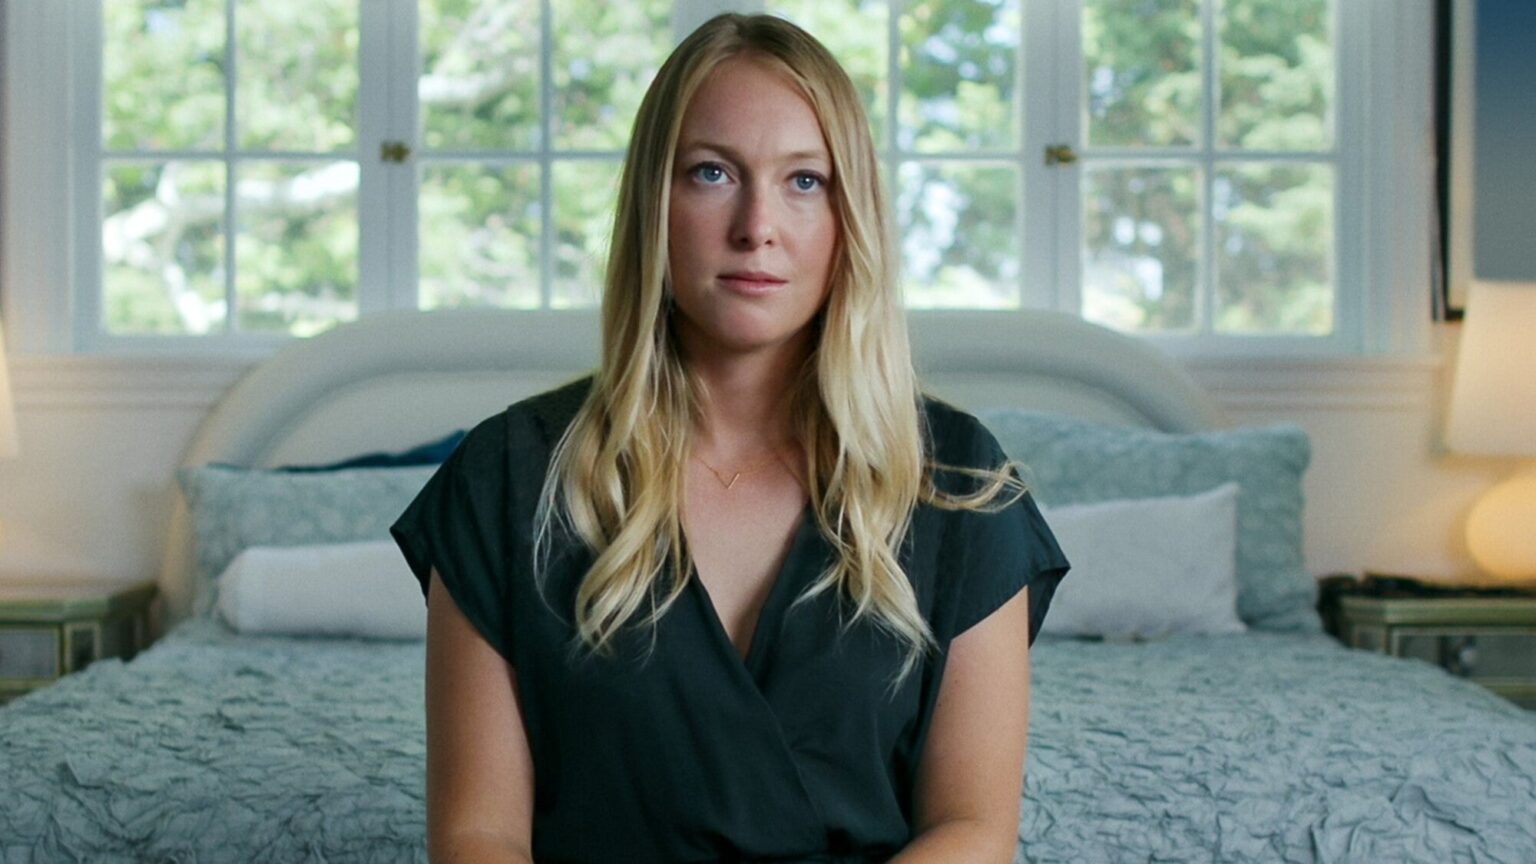 India Oxenberg is speaking out about the abuse she suffered at the hands of NXIVM. Was Oxenberg afraid of Allison Mack?